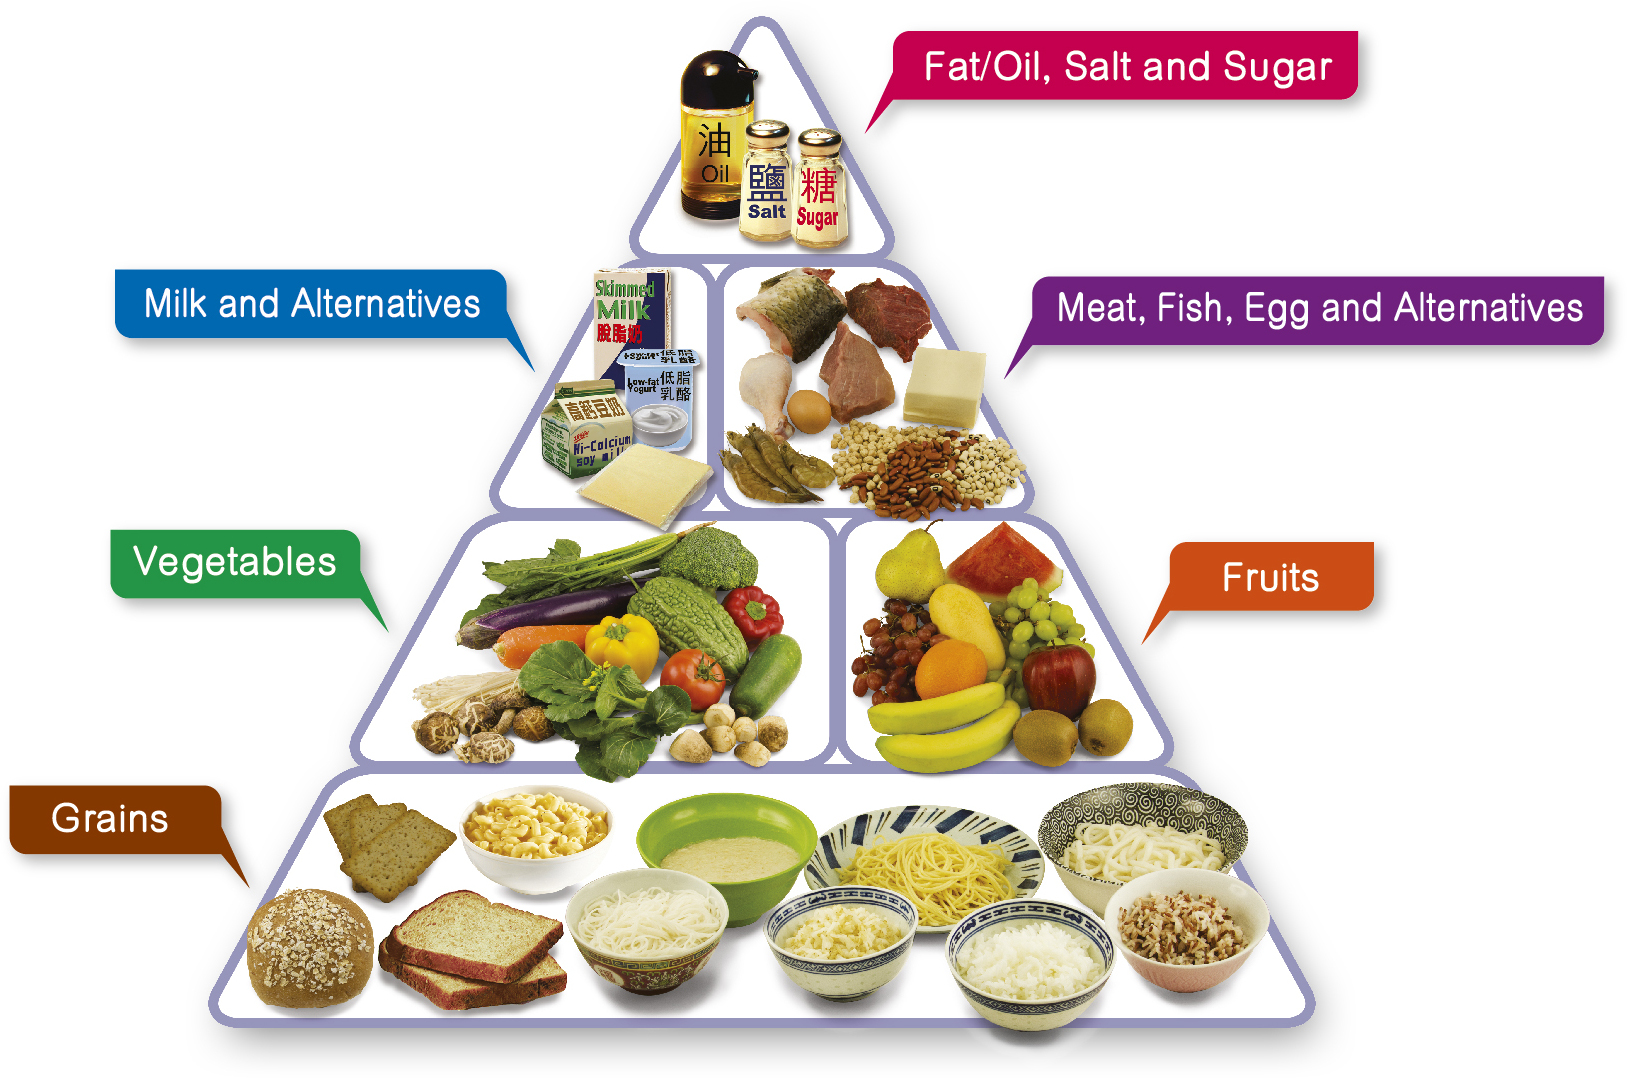 Centre for Health Protection - The Food Pyramid – A Guide to a